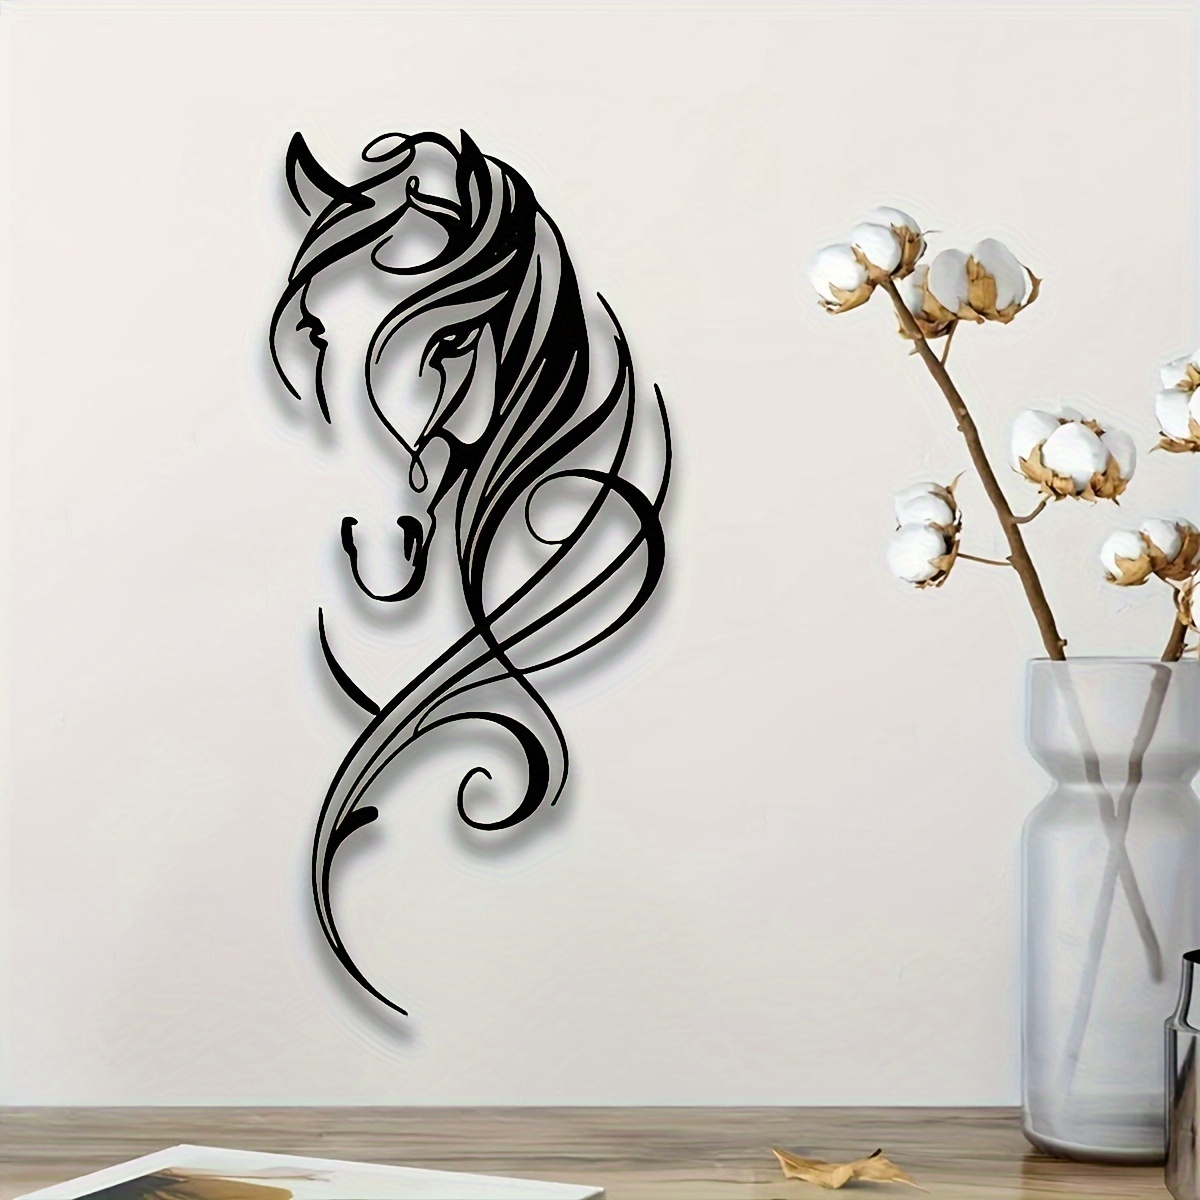 

Modern Abstract Horse Metal Wall Art - Aesthetic Retro Hanging Decor For Home, Office, Bar & Kitchen - Perfect For Valentine's Day & New Year